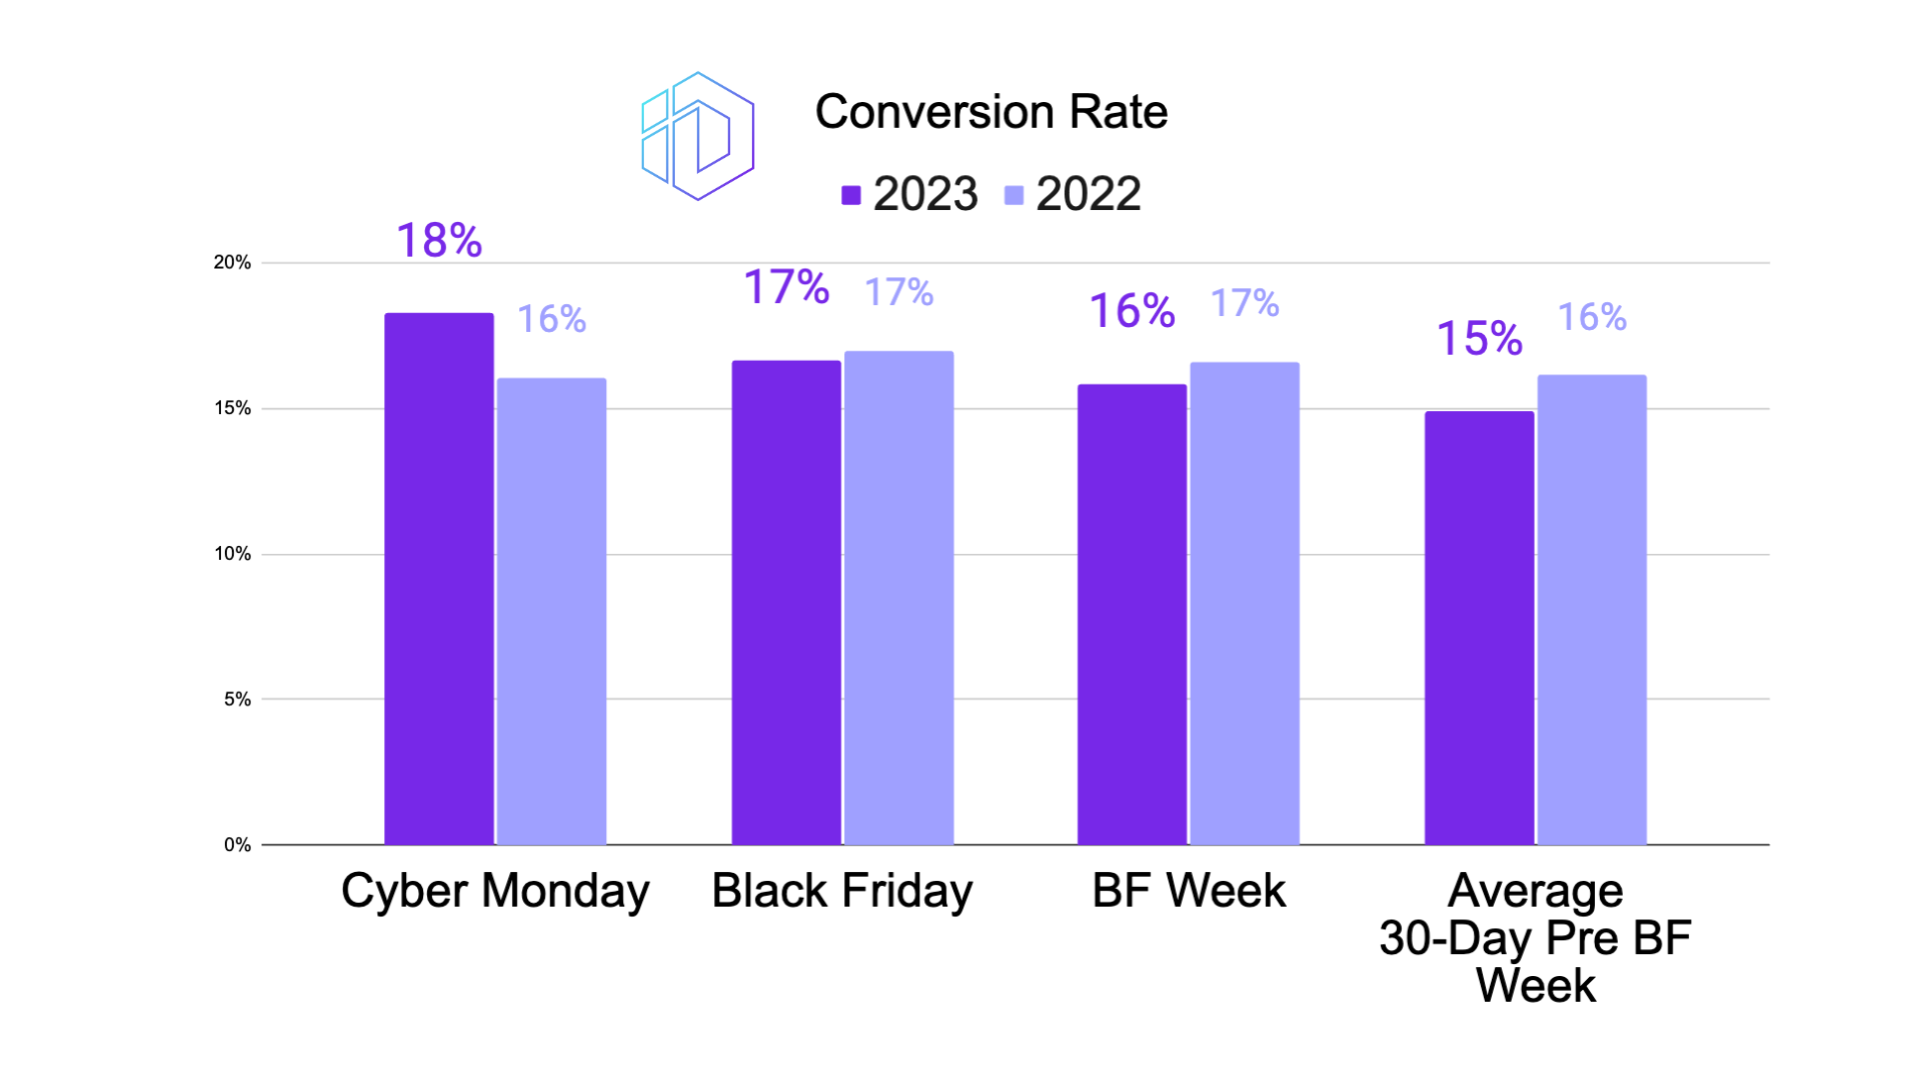 Line graph showing the Conversion Rate (CVR) for Cyber Monday, Black Friday, BF Week, and Average 30-Day Pre BF Week in 2022 and 2023. Conversion rates are relatively stable with a notable increase on Cyber Monday 2023.